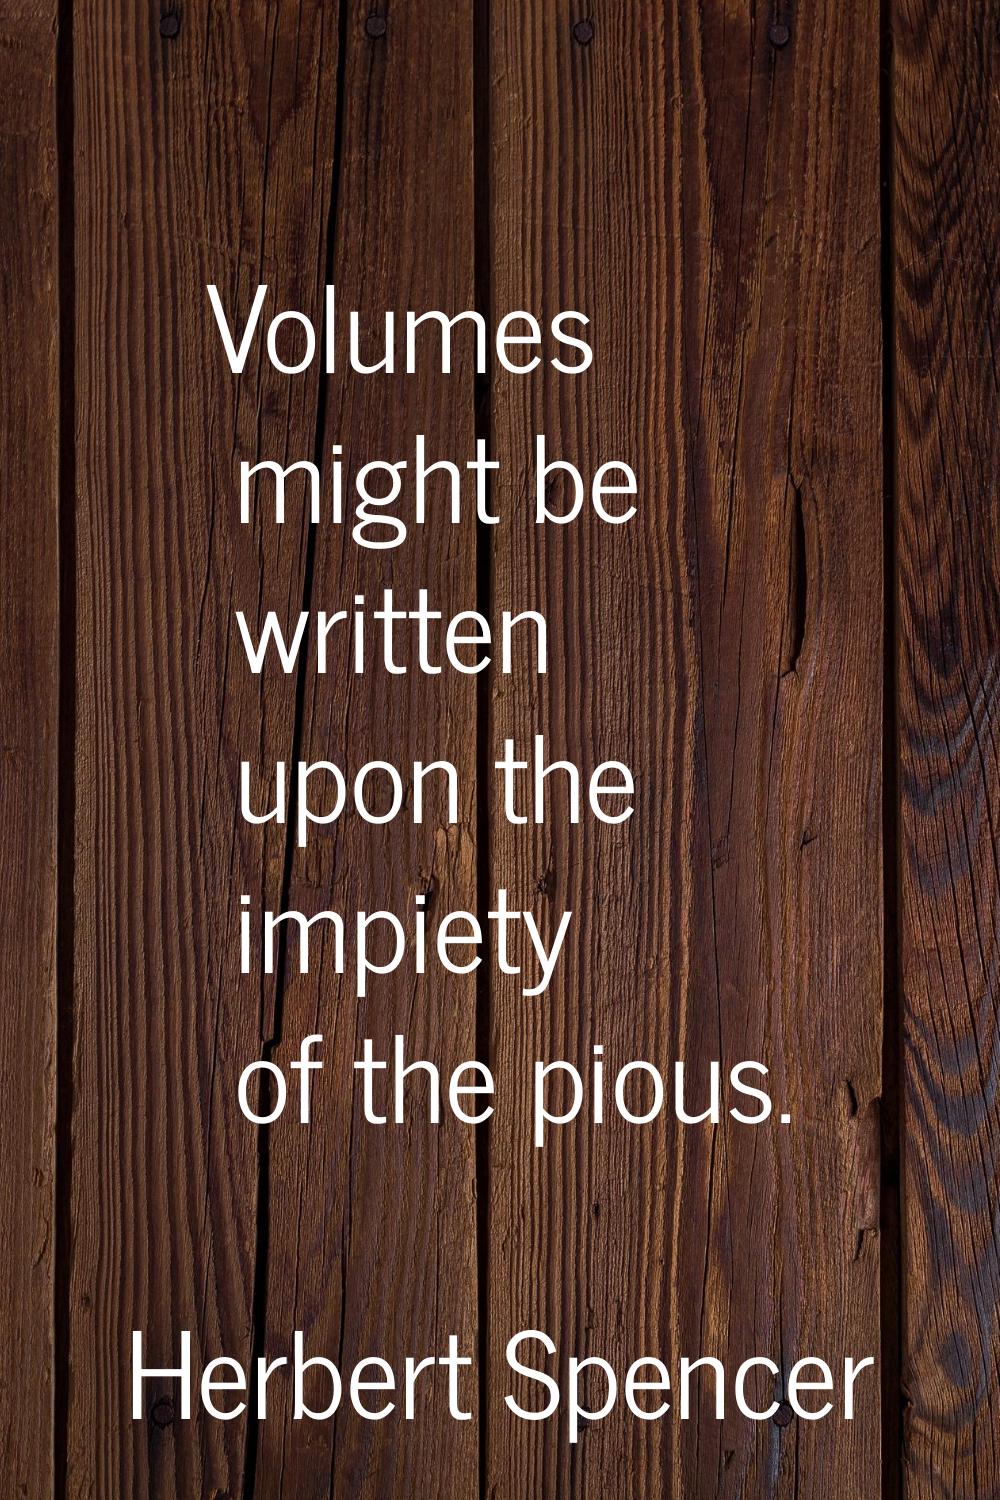 Volumes might be written upon the impiety of the pious.